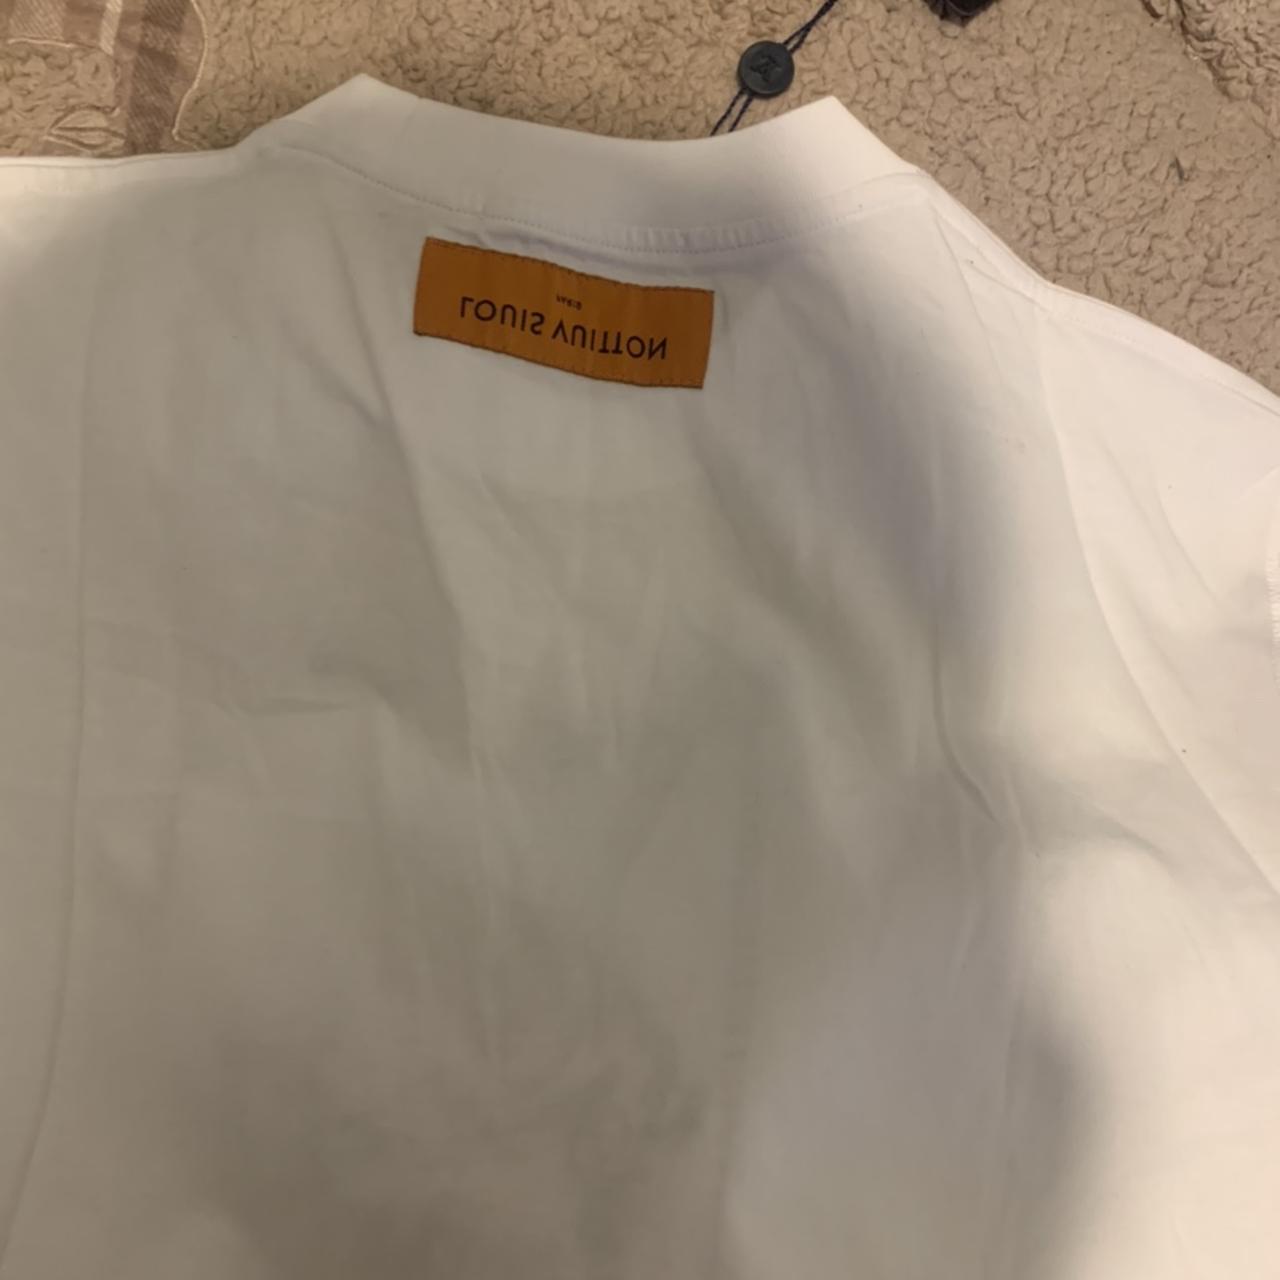 Louis Vuitton Smoke T-shirt 100% authentic with - Depop